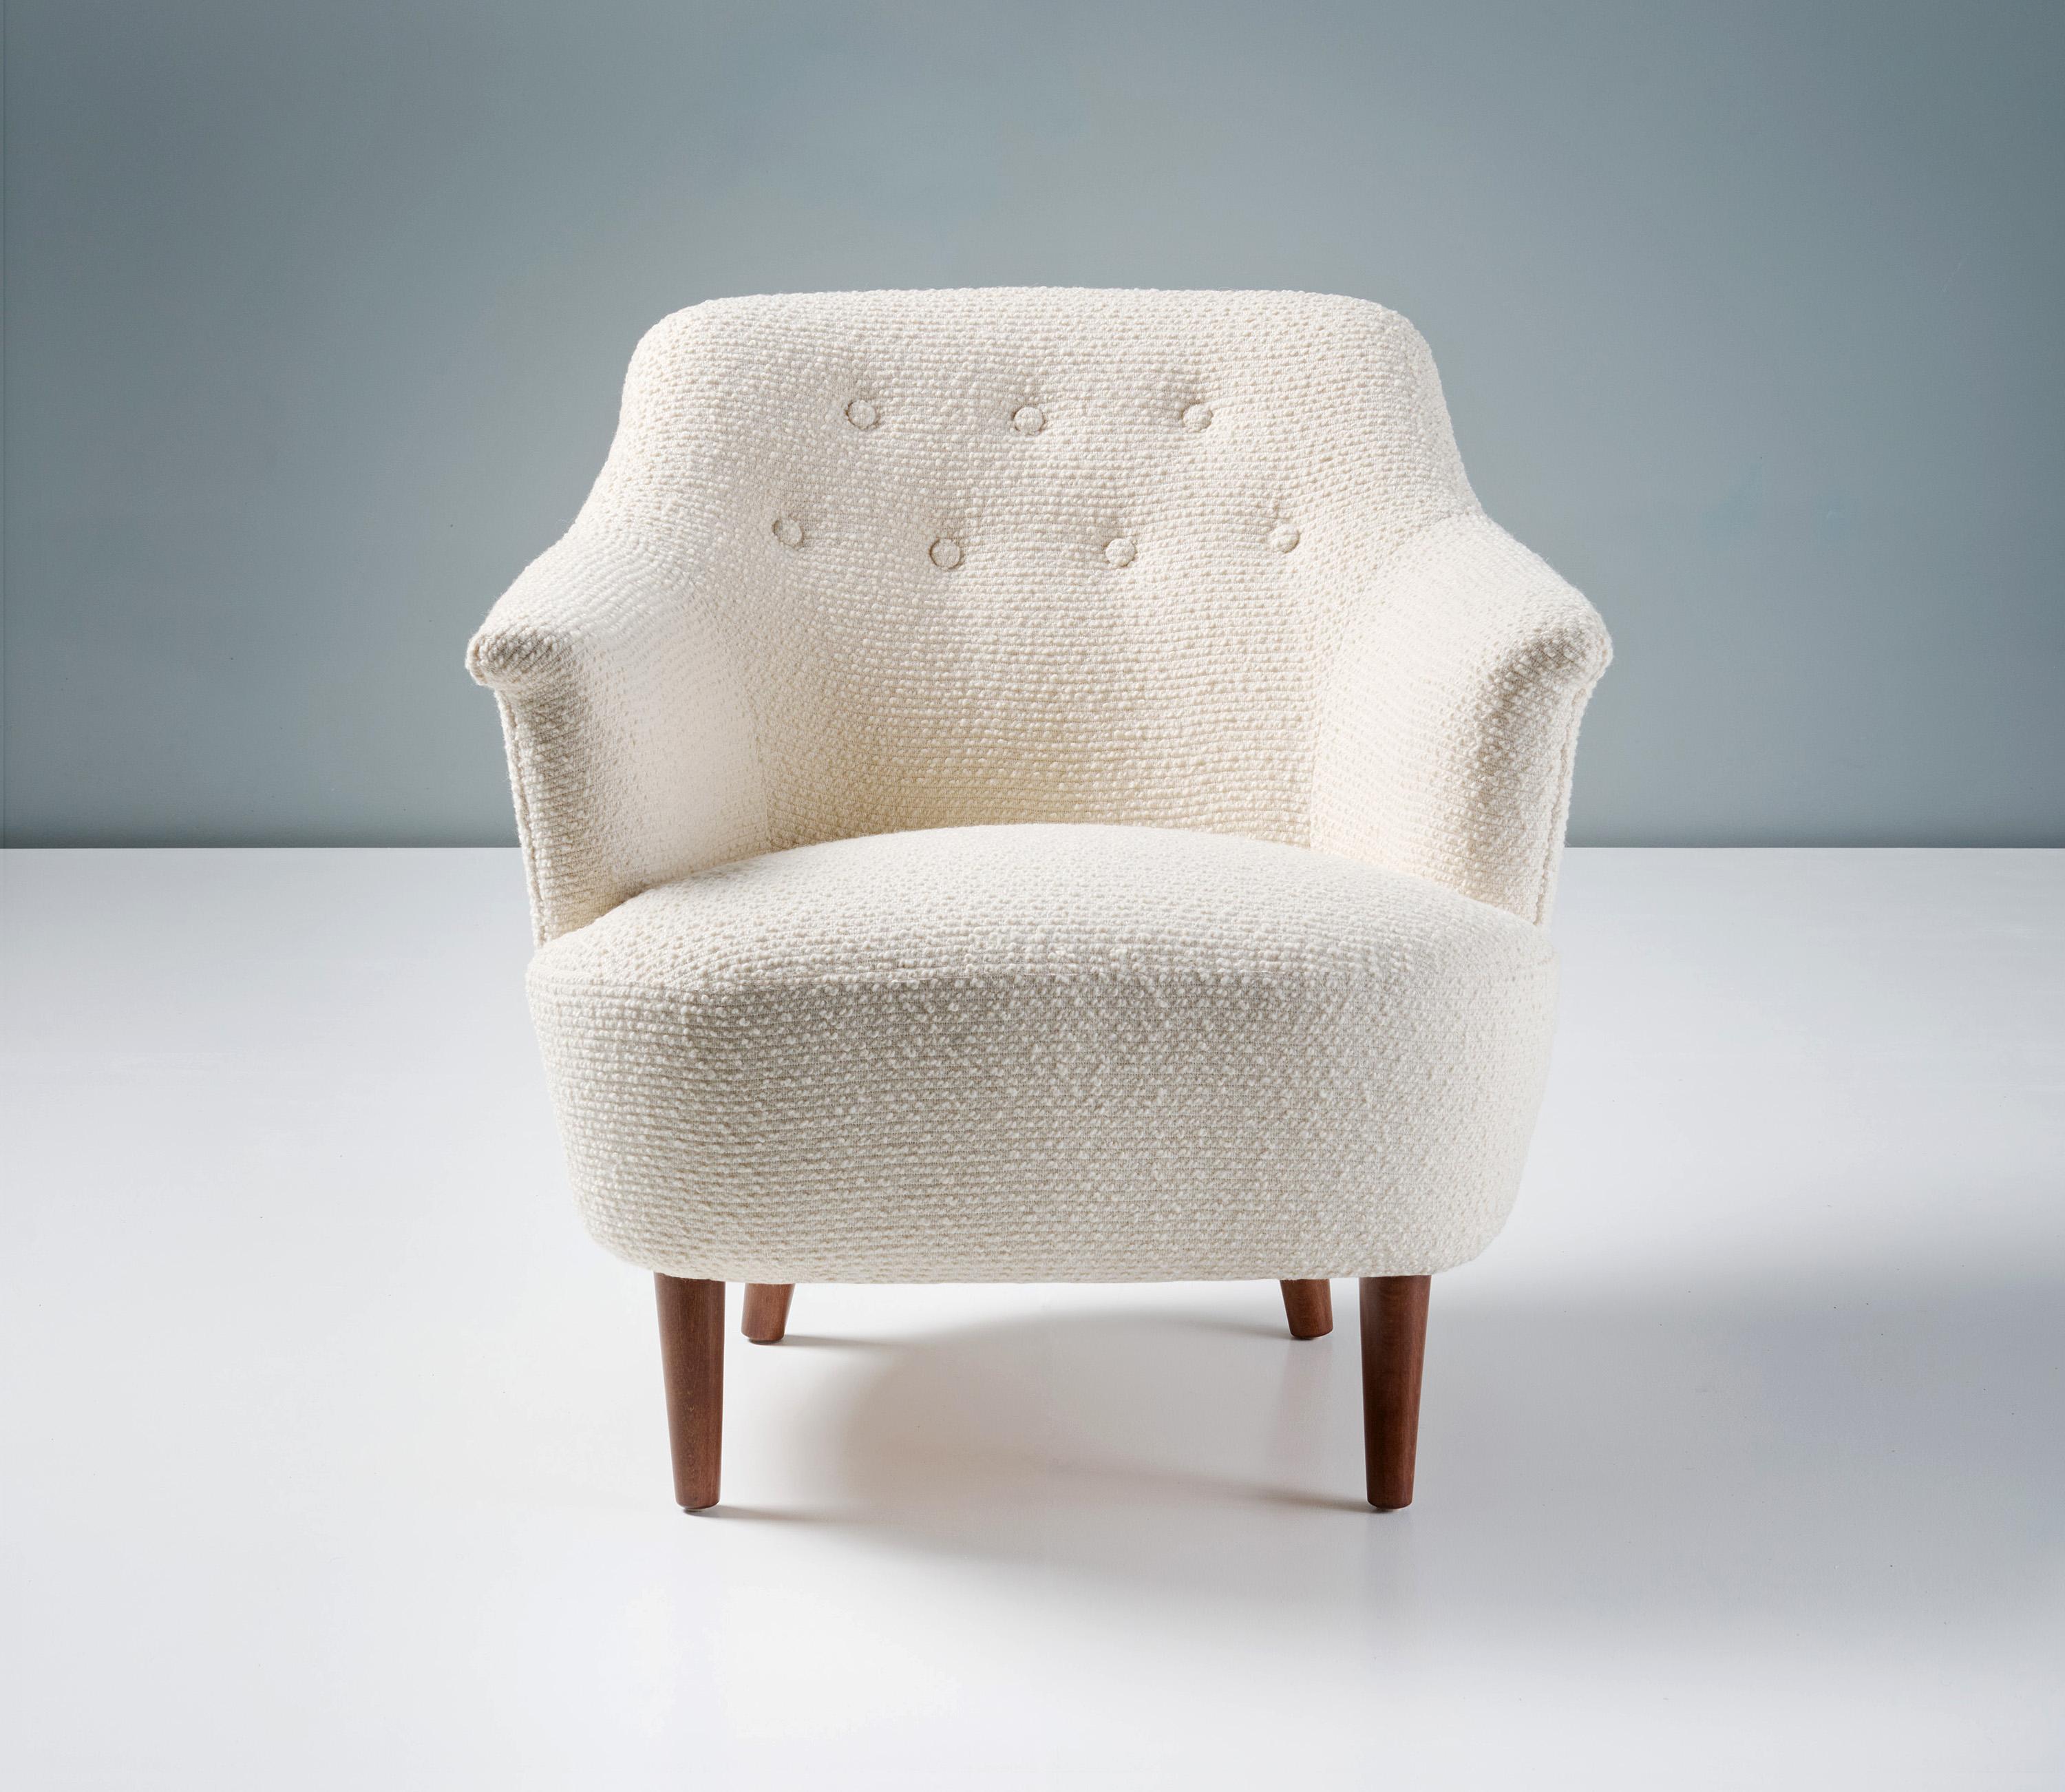 Carl Malmsten - Occasional Armchair, circa 1950s.

An elegant, classical occasional chair designed by Swedish master: Carl Malmsten. The chair has been reupholstered in British designer Rose Uniacke's textured wool fabric and has stained elm wood